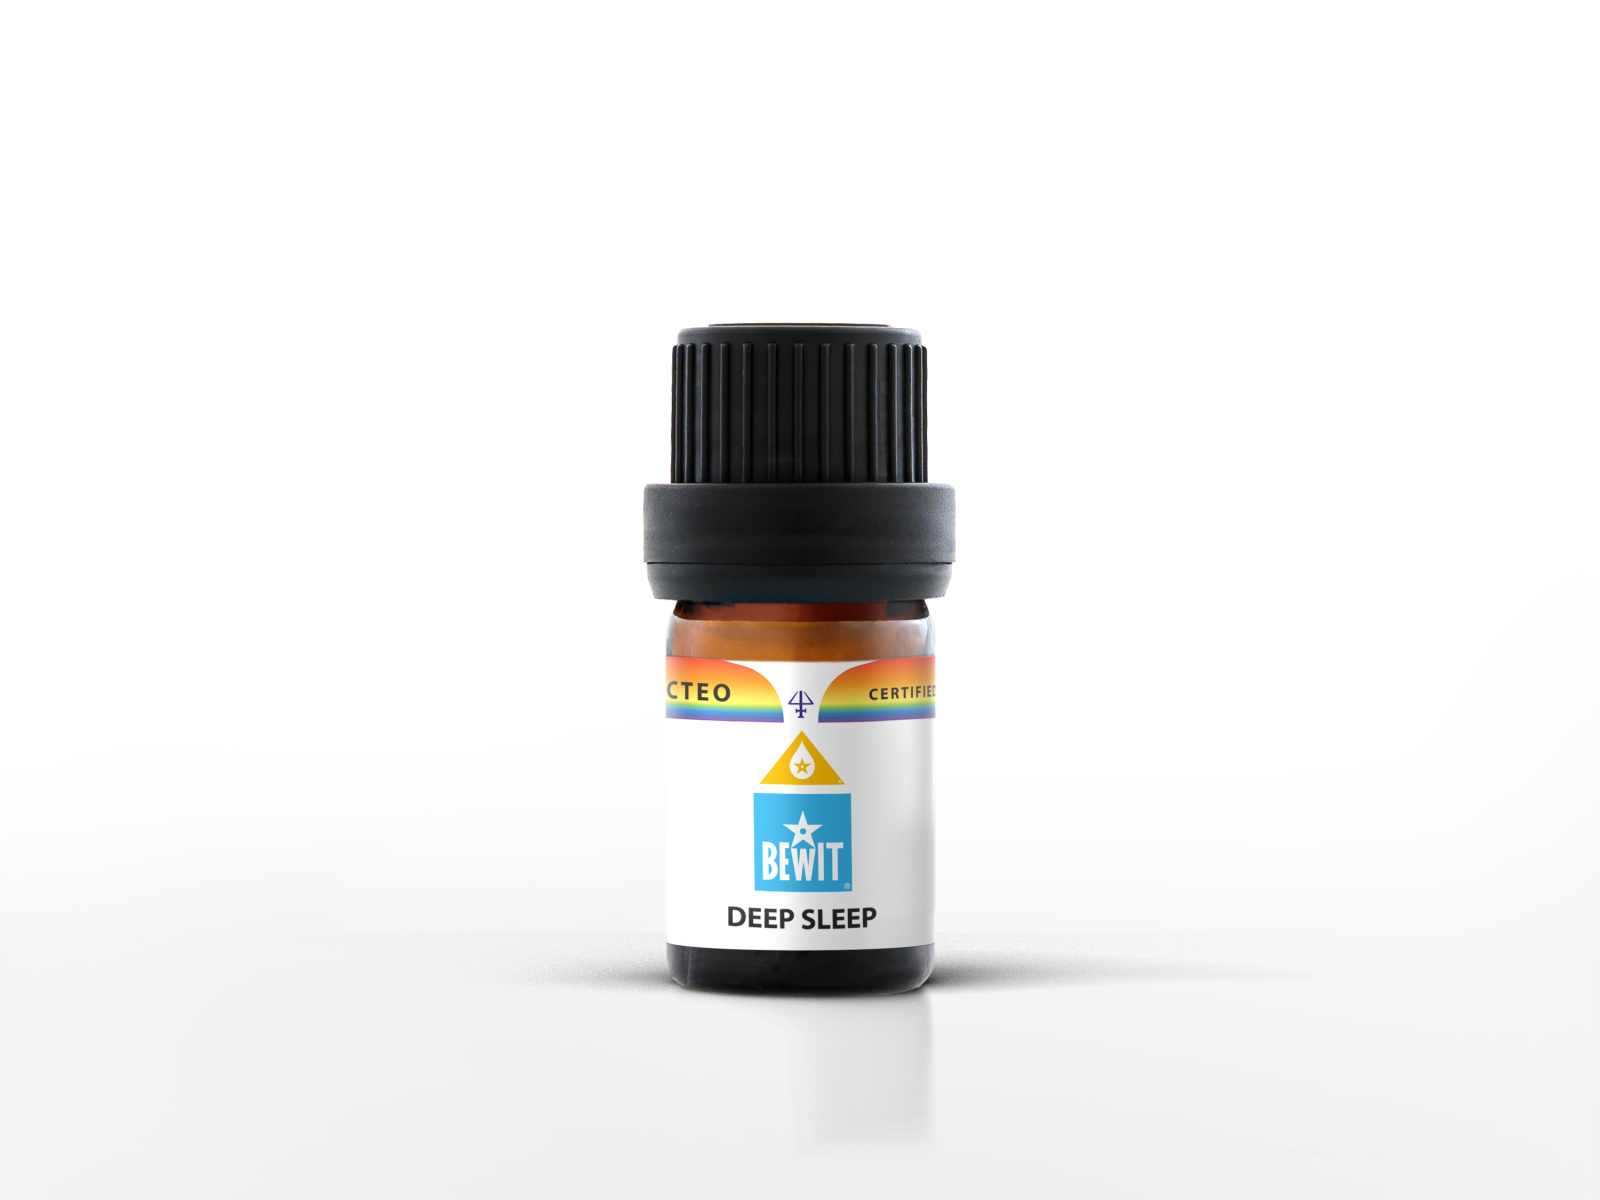 BEWIT DEEP SLEEP - It is a unique blend of the essential oils - 2